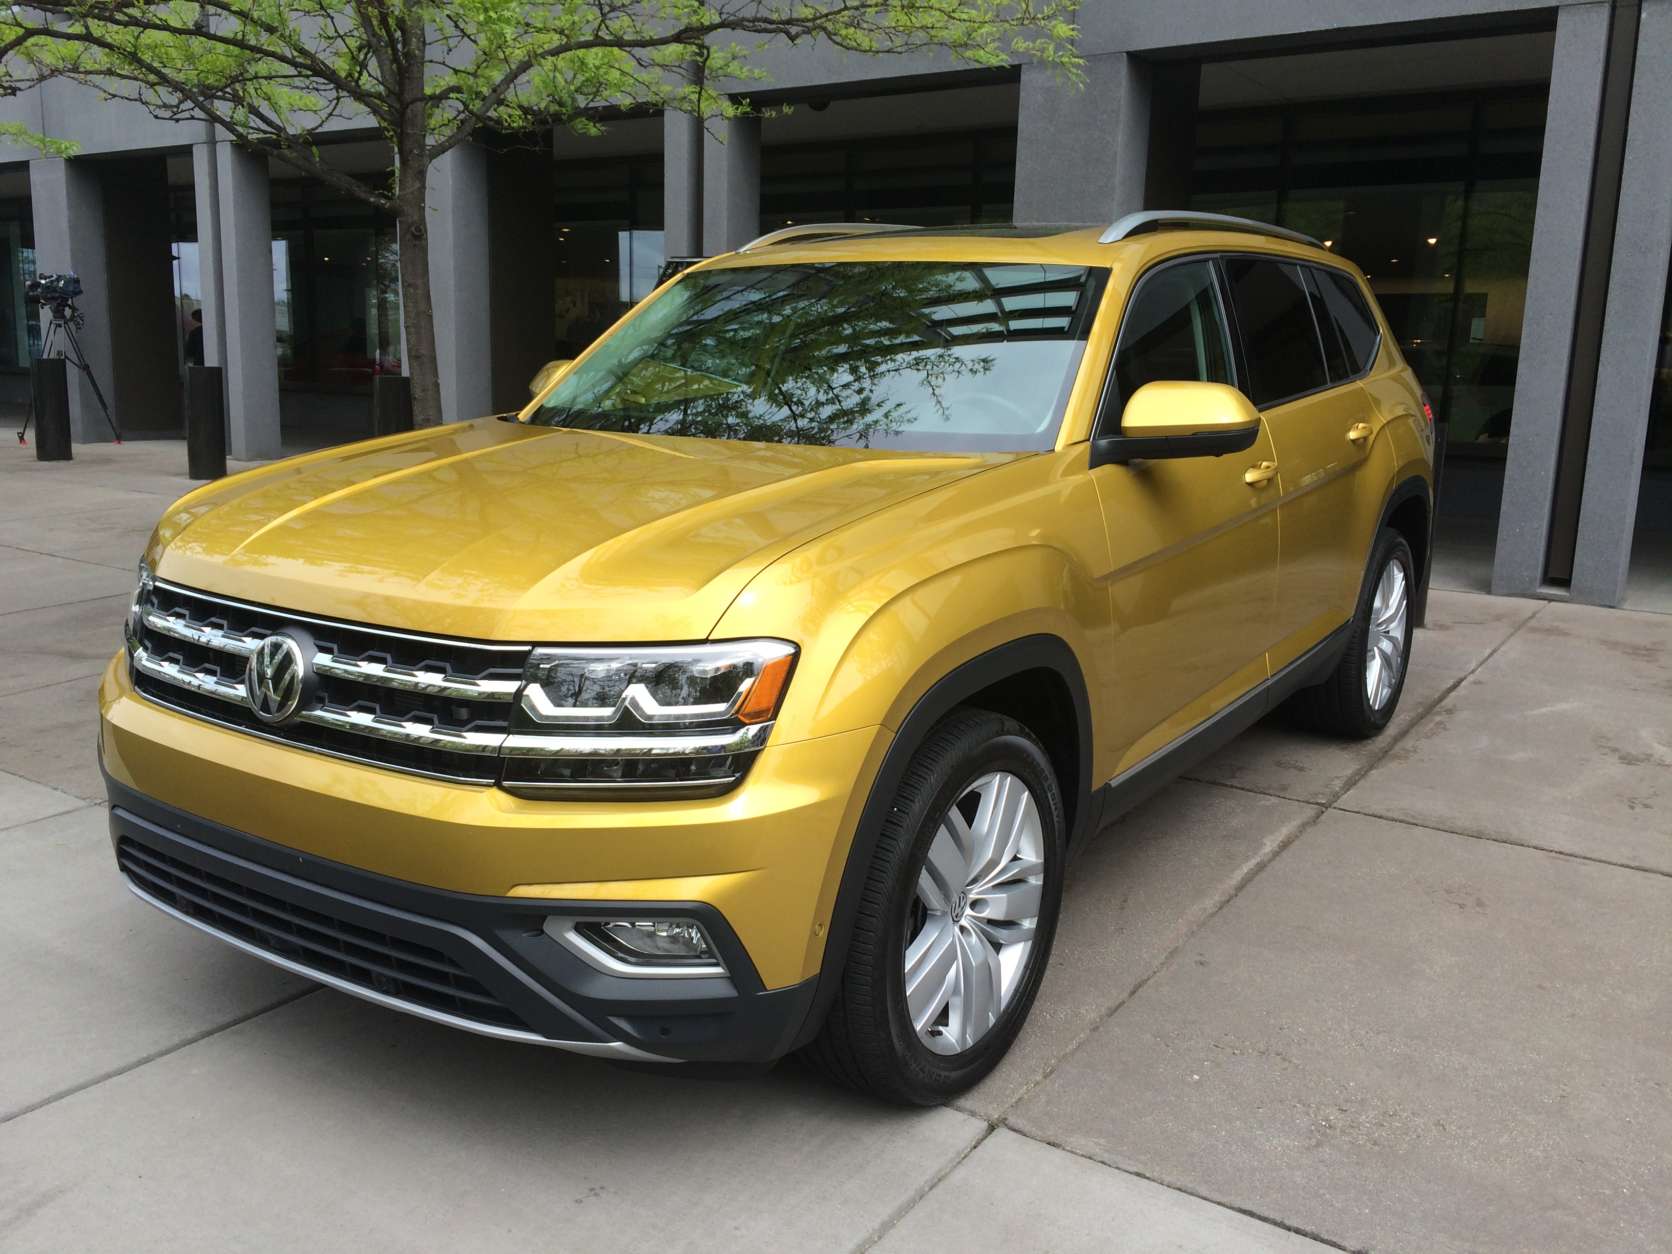 As the newest seven-seat midsize crossover about to hit the market, the 2018 Volkswagen Atlas looks like a solid competitor. (WTOP/Mike Parris)